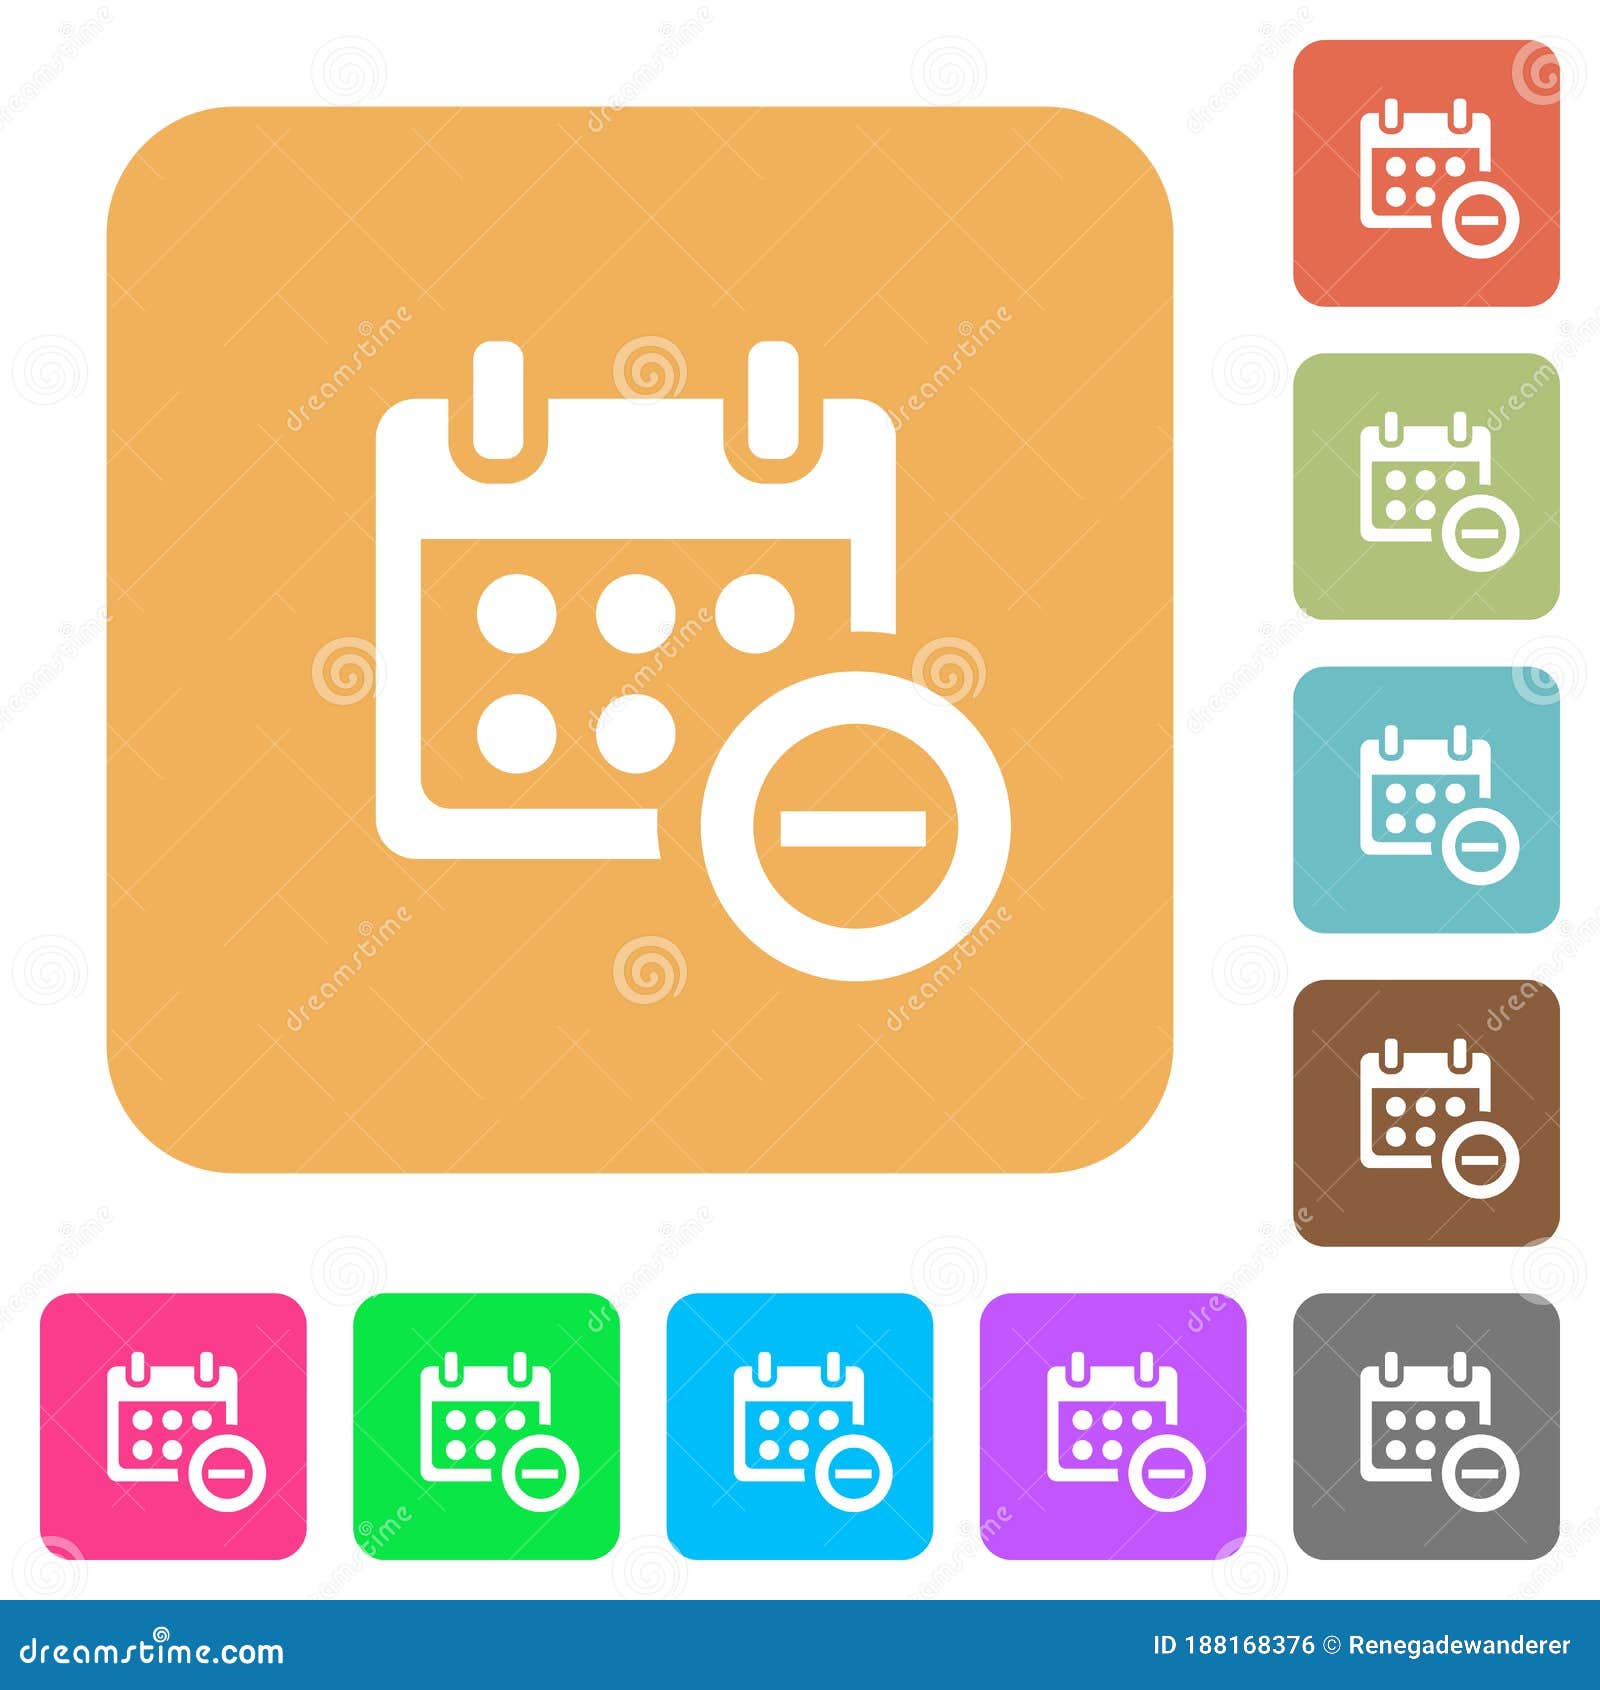 Remove Event from Calendar Rounded Square Flat Icons Stock Vector